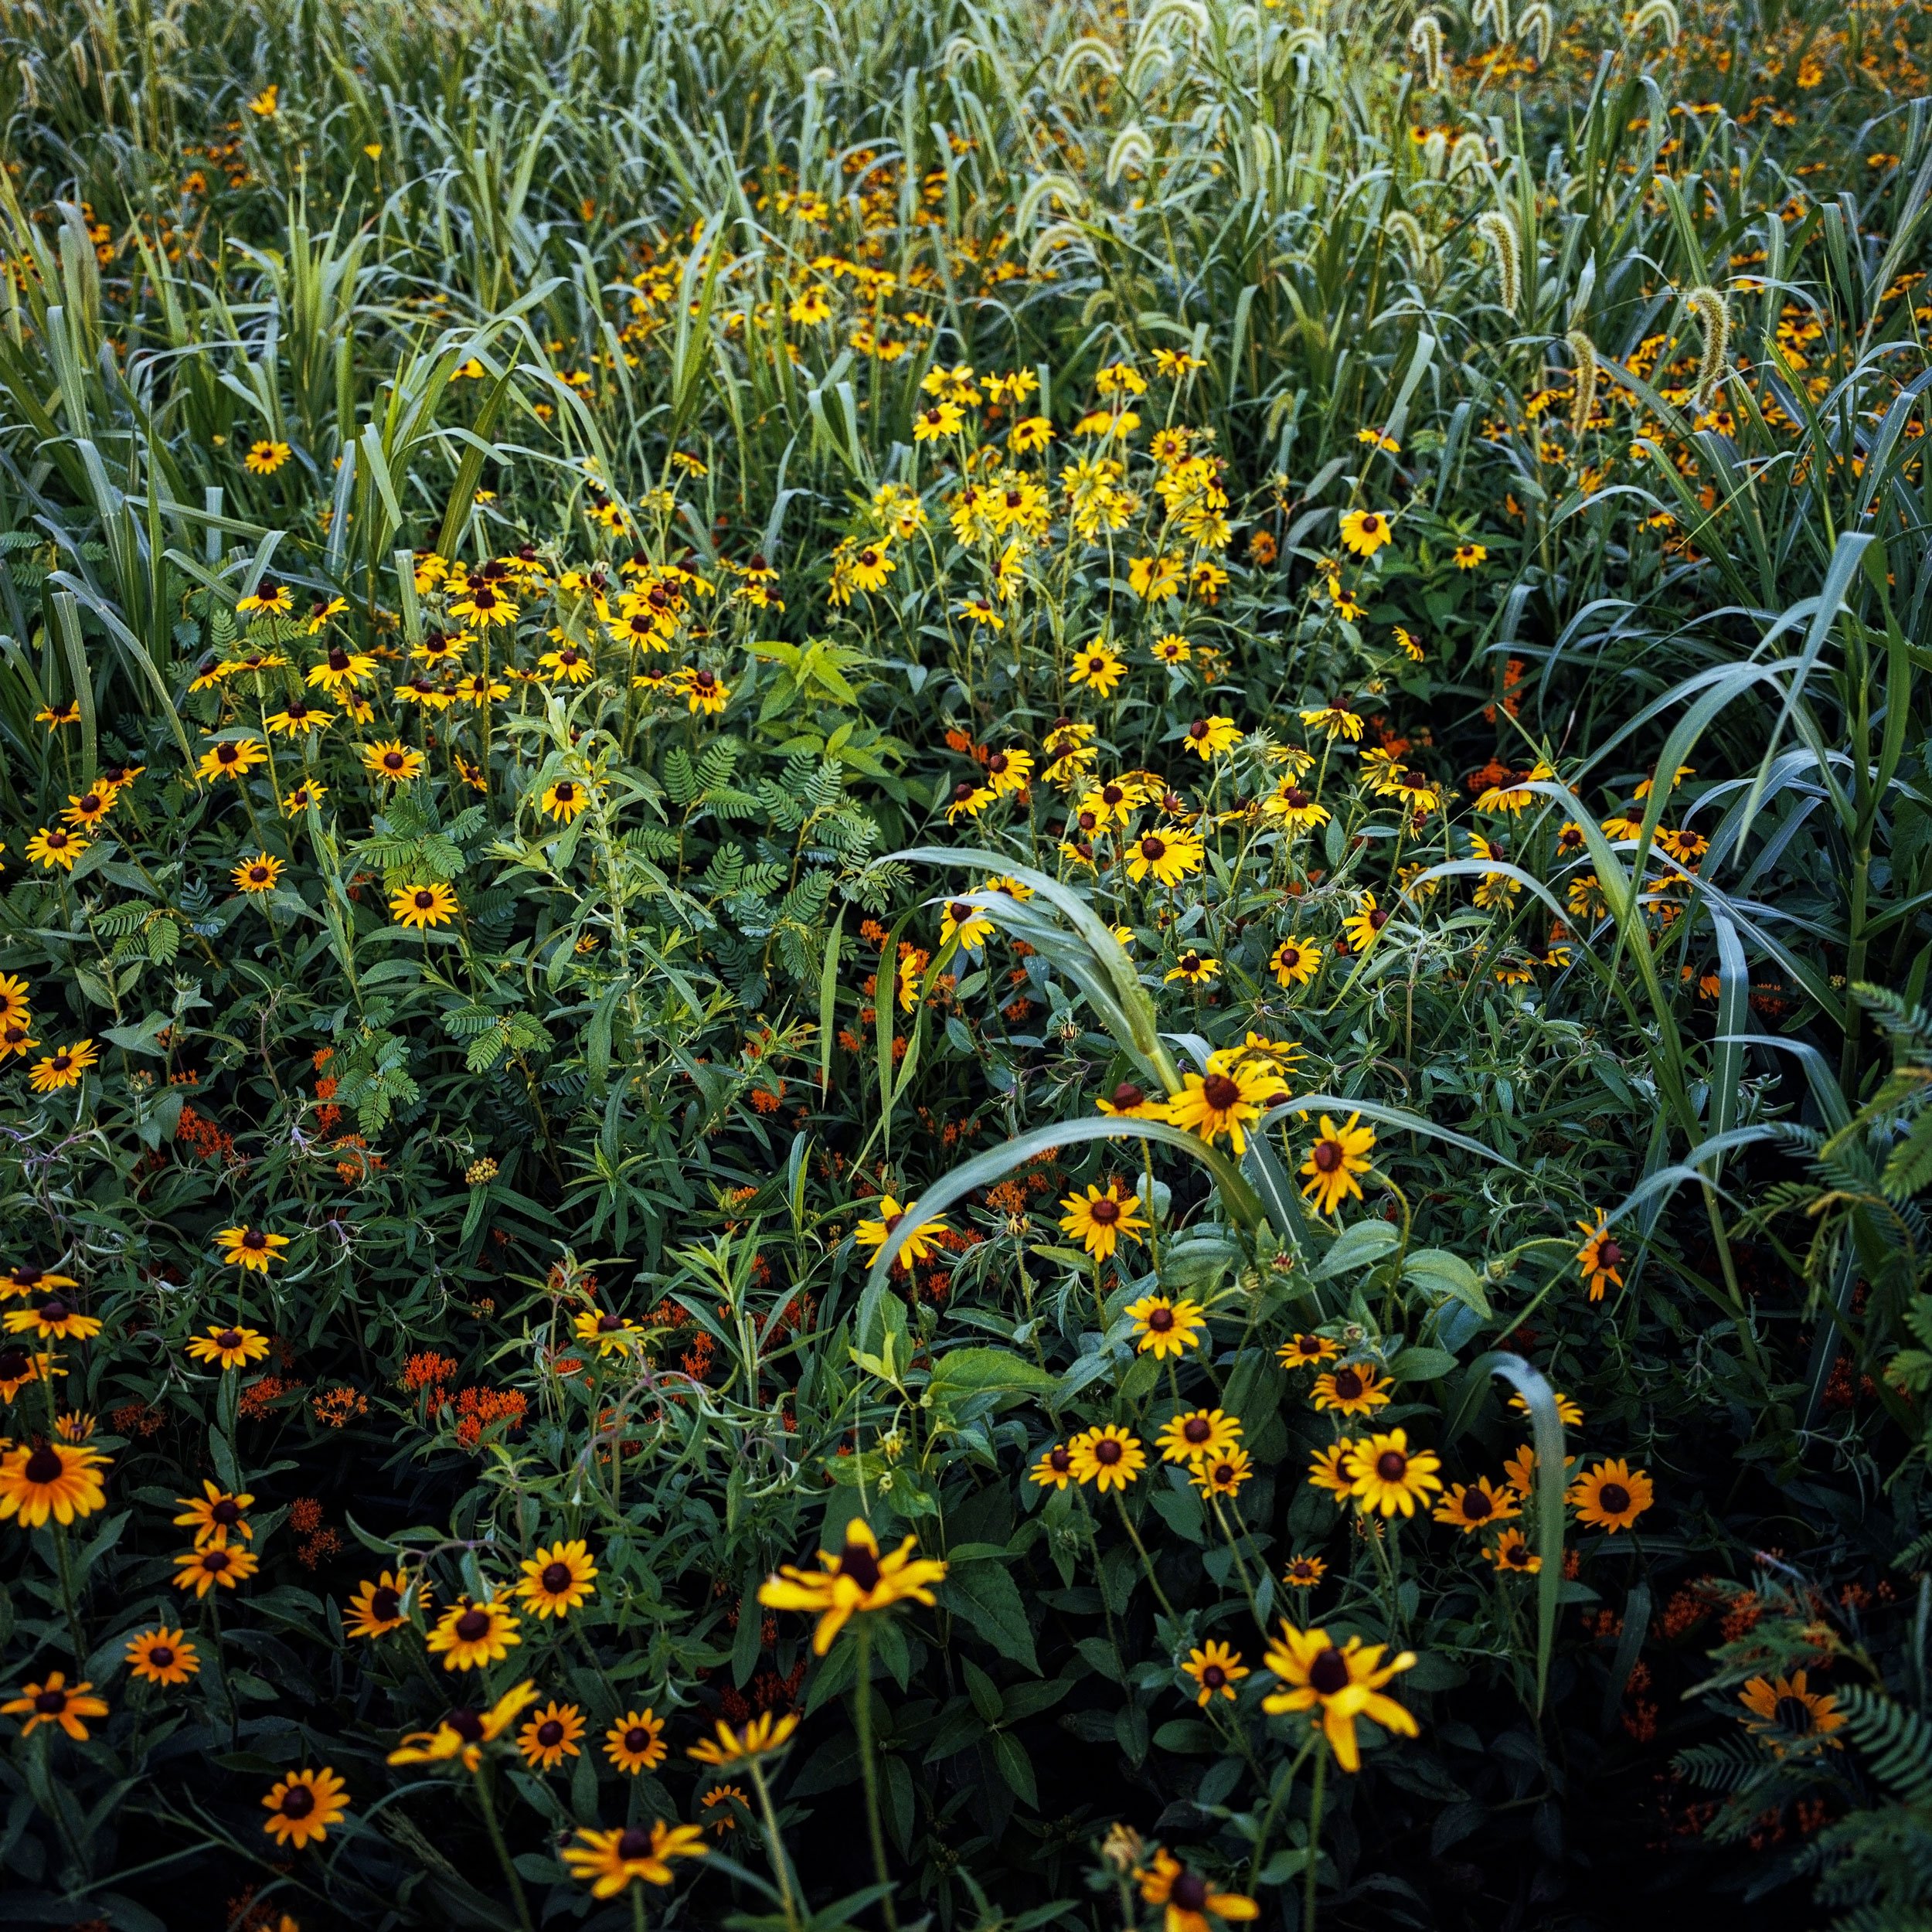 Black Eyed Susan and Butterfly Weed